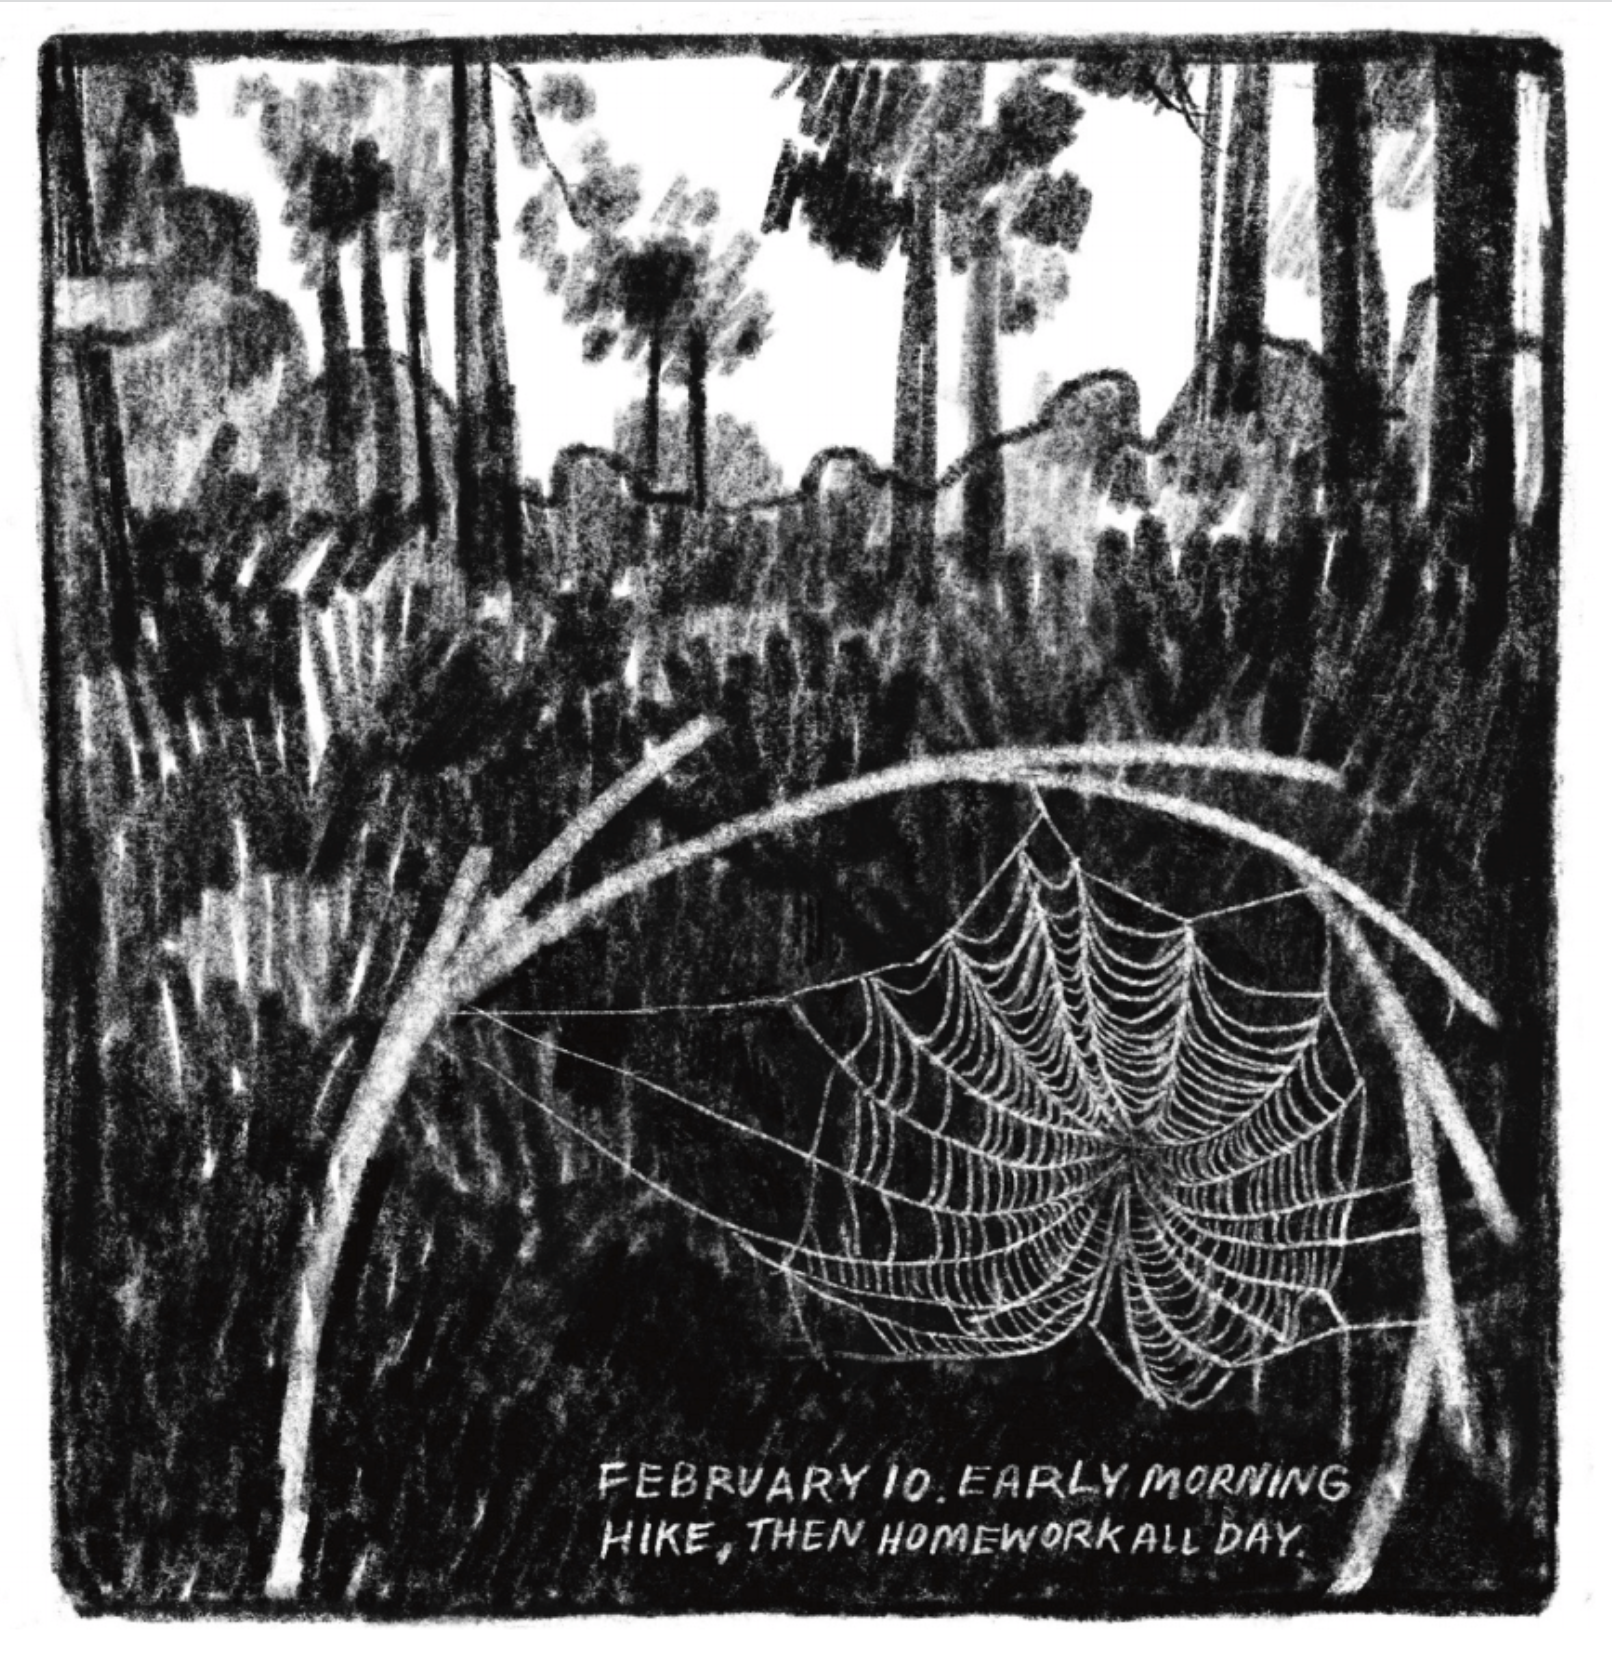 Hold Still Episode 7, Panel 6 "February 10. Early morning hike, then homework all day." Drawing of spider web in the woods